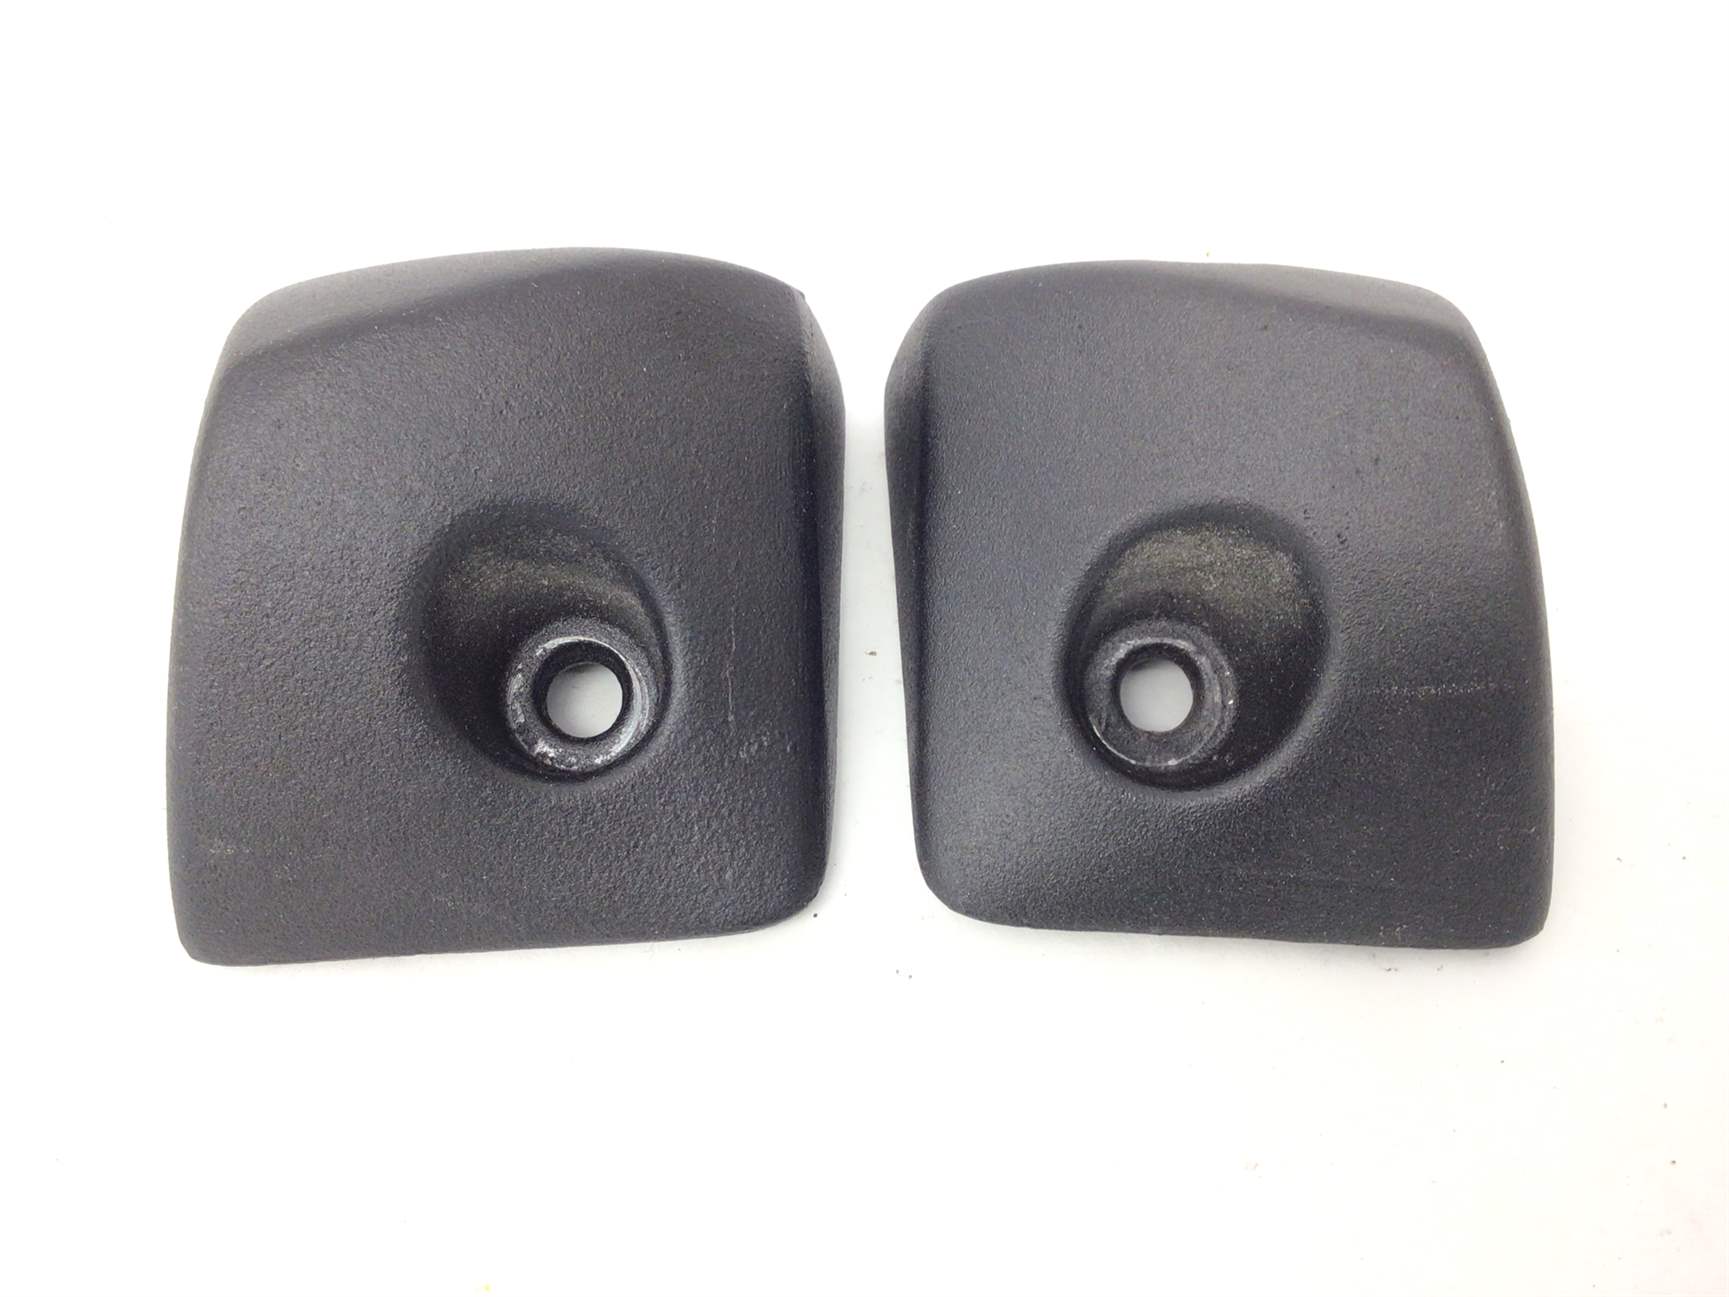 Rear Rollor End Cap Set (Used)